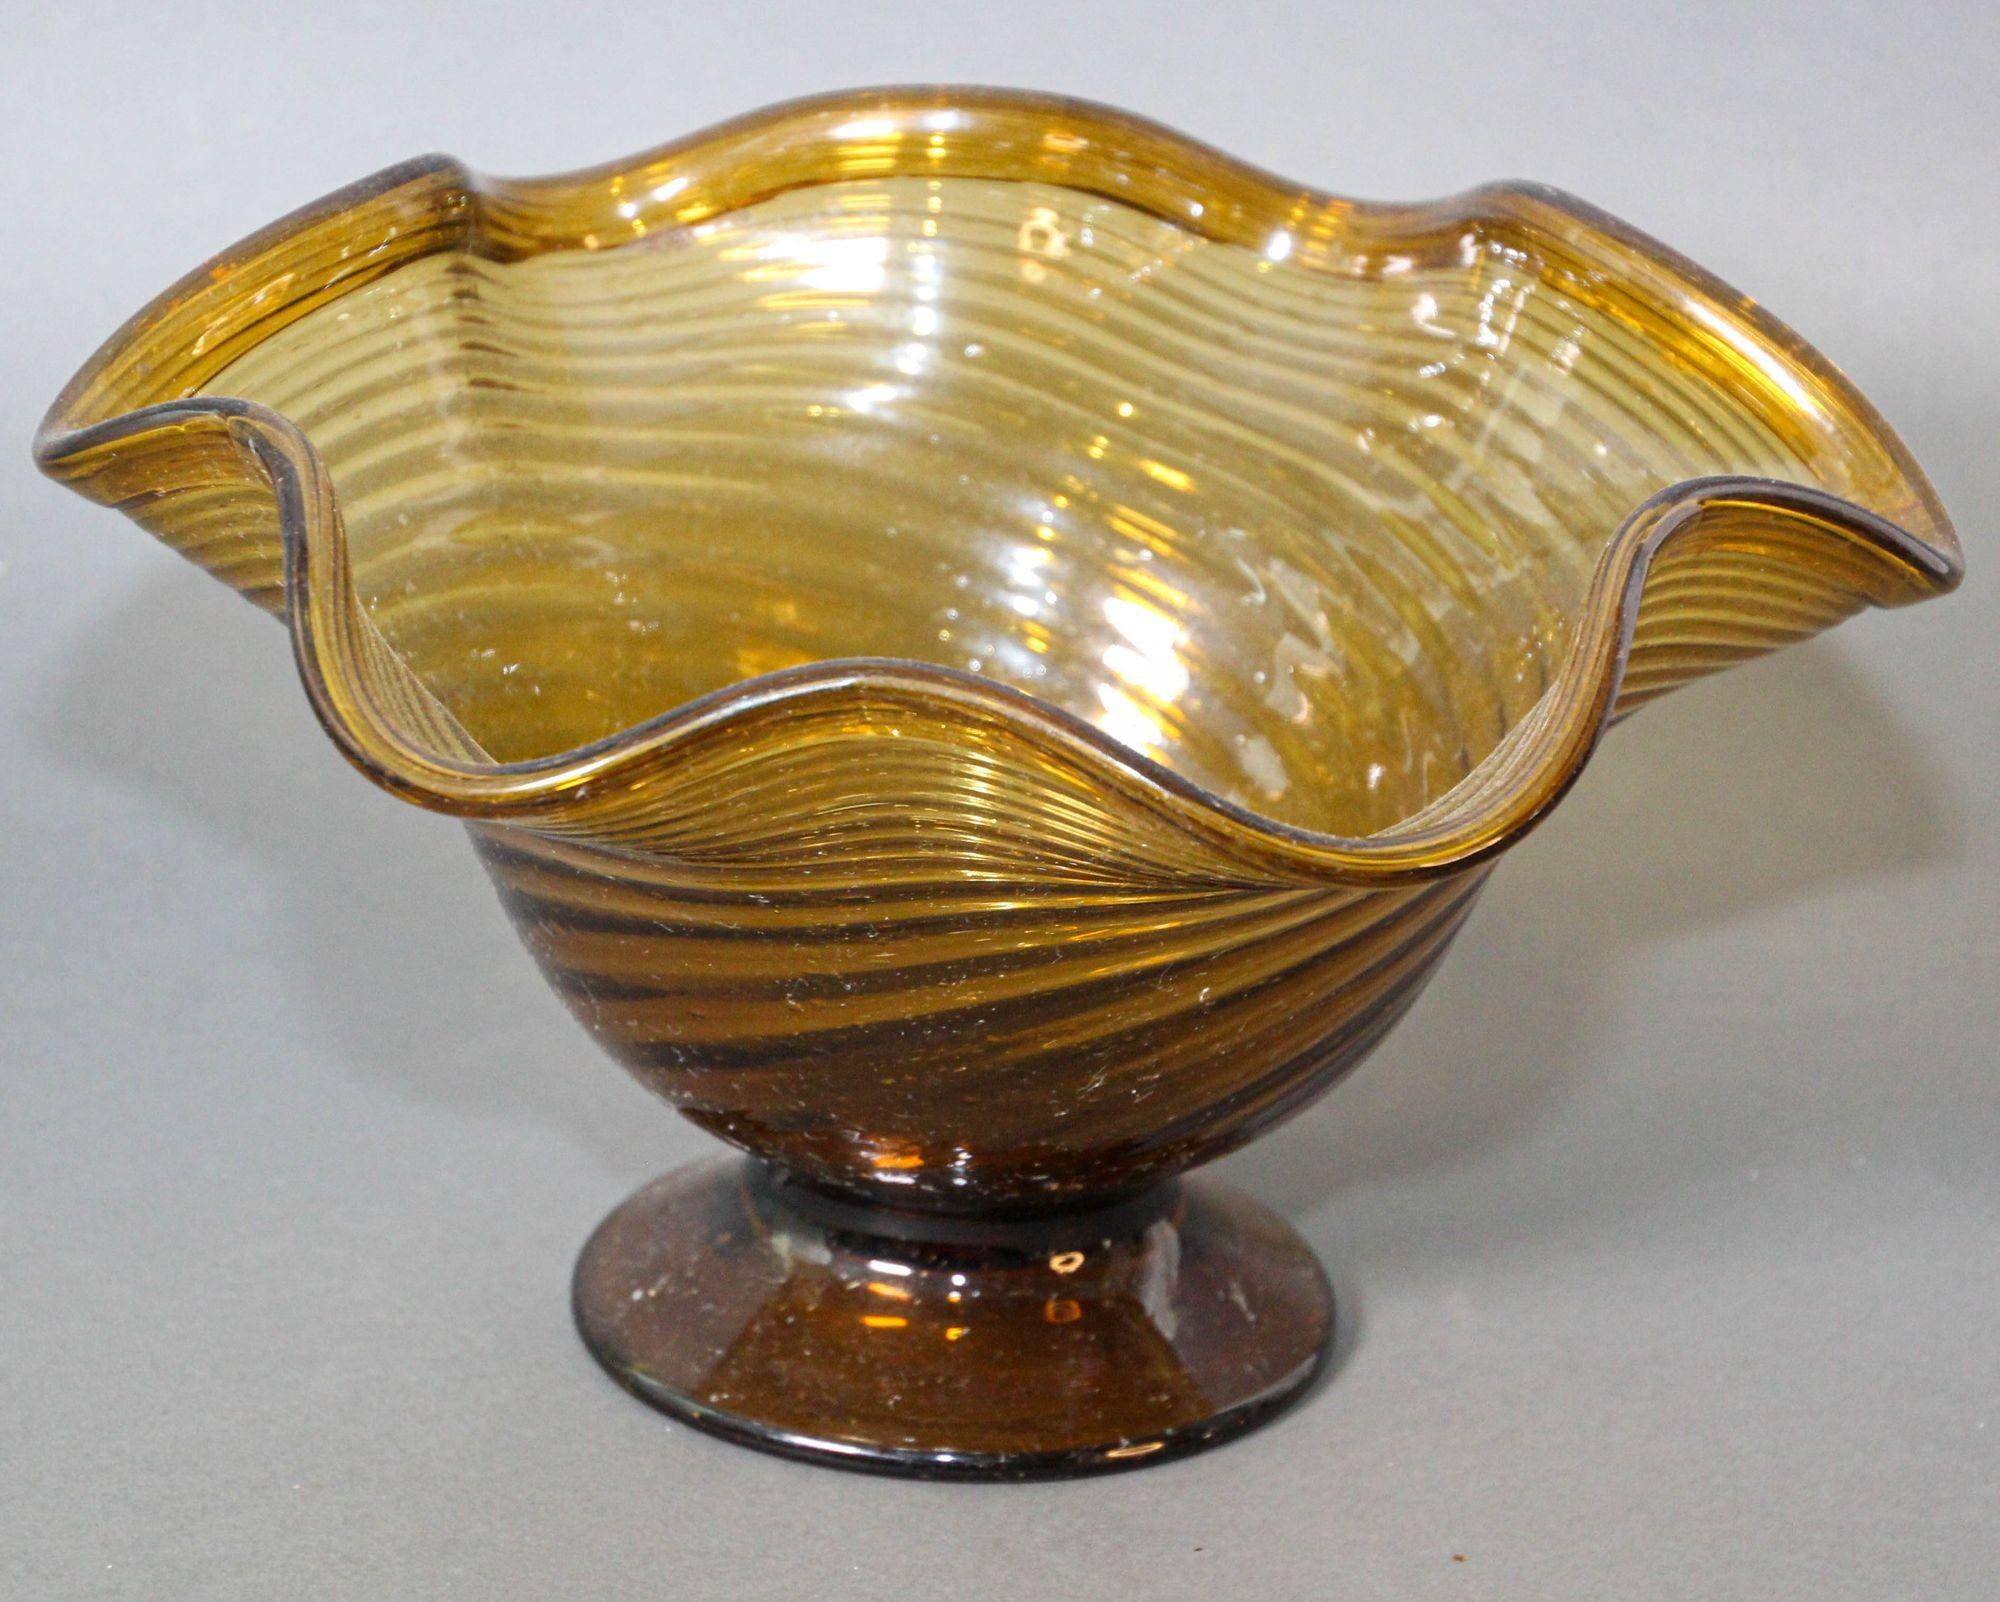 Italian Vintage Amber Murano Art Glass Decorative Footed Fruit Bowl 1960s Italy For Sale